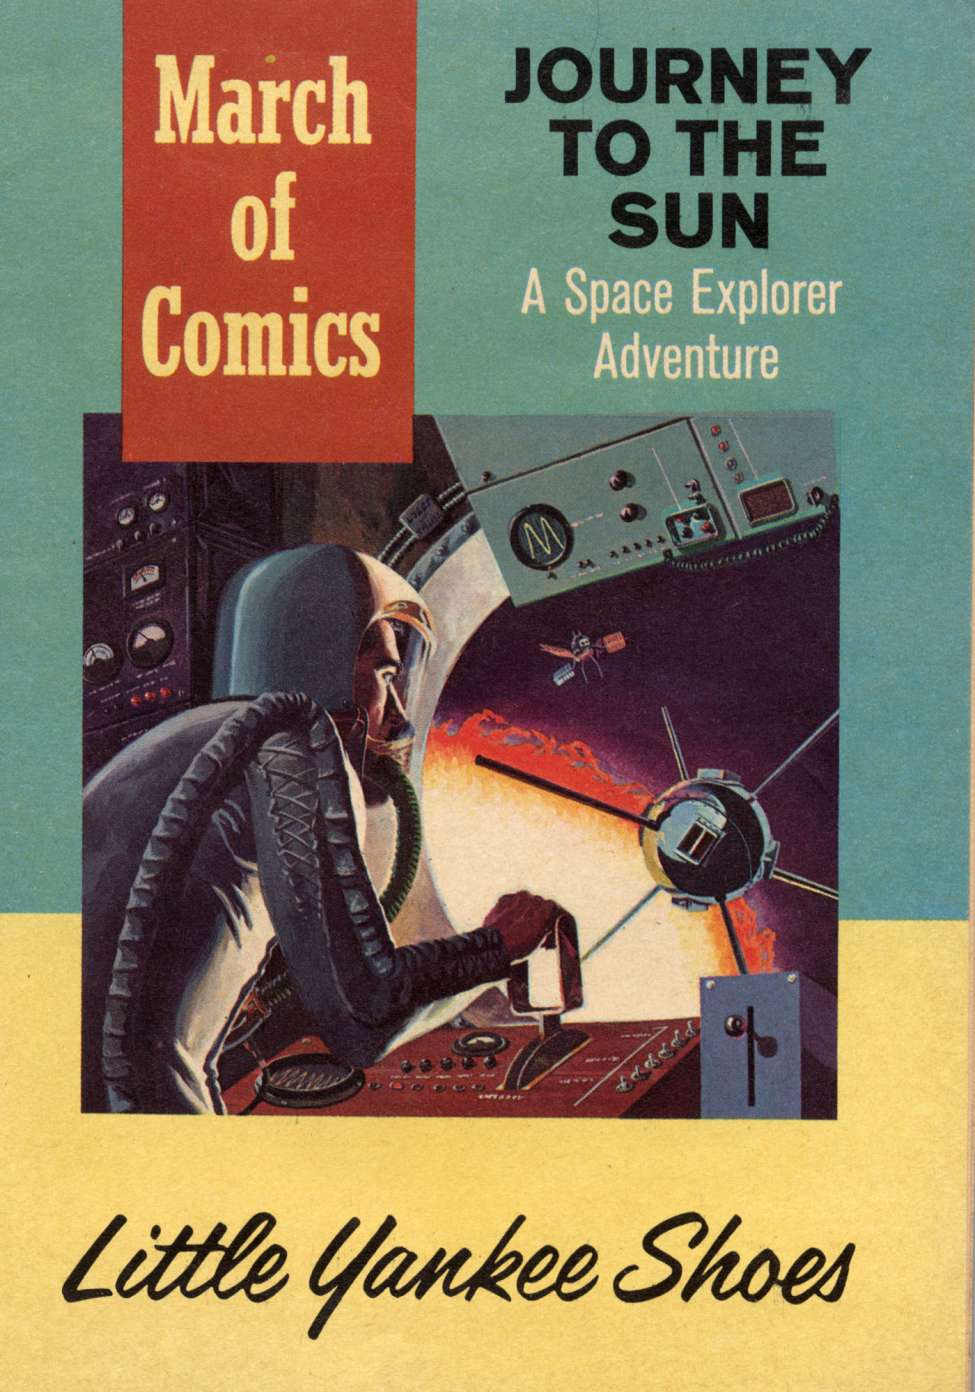 Comic Book Cover For March of Comics 219 - Journey To The Sun